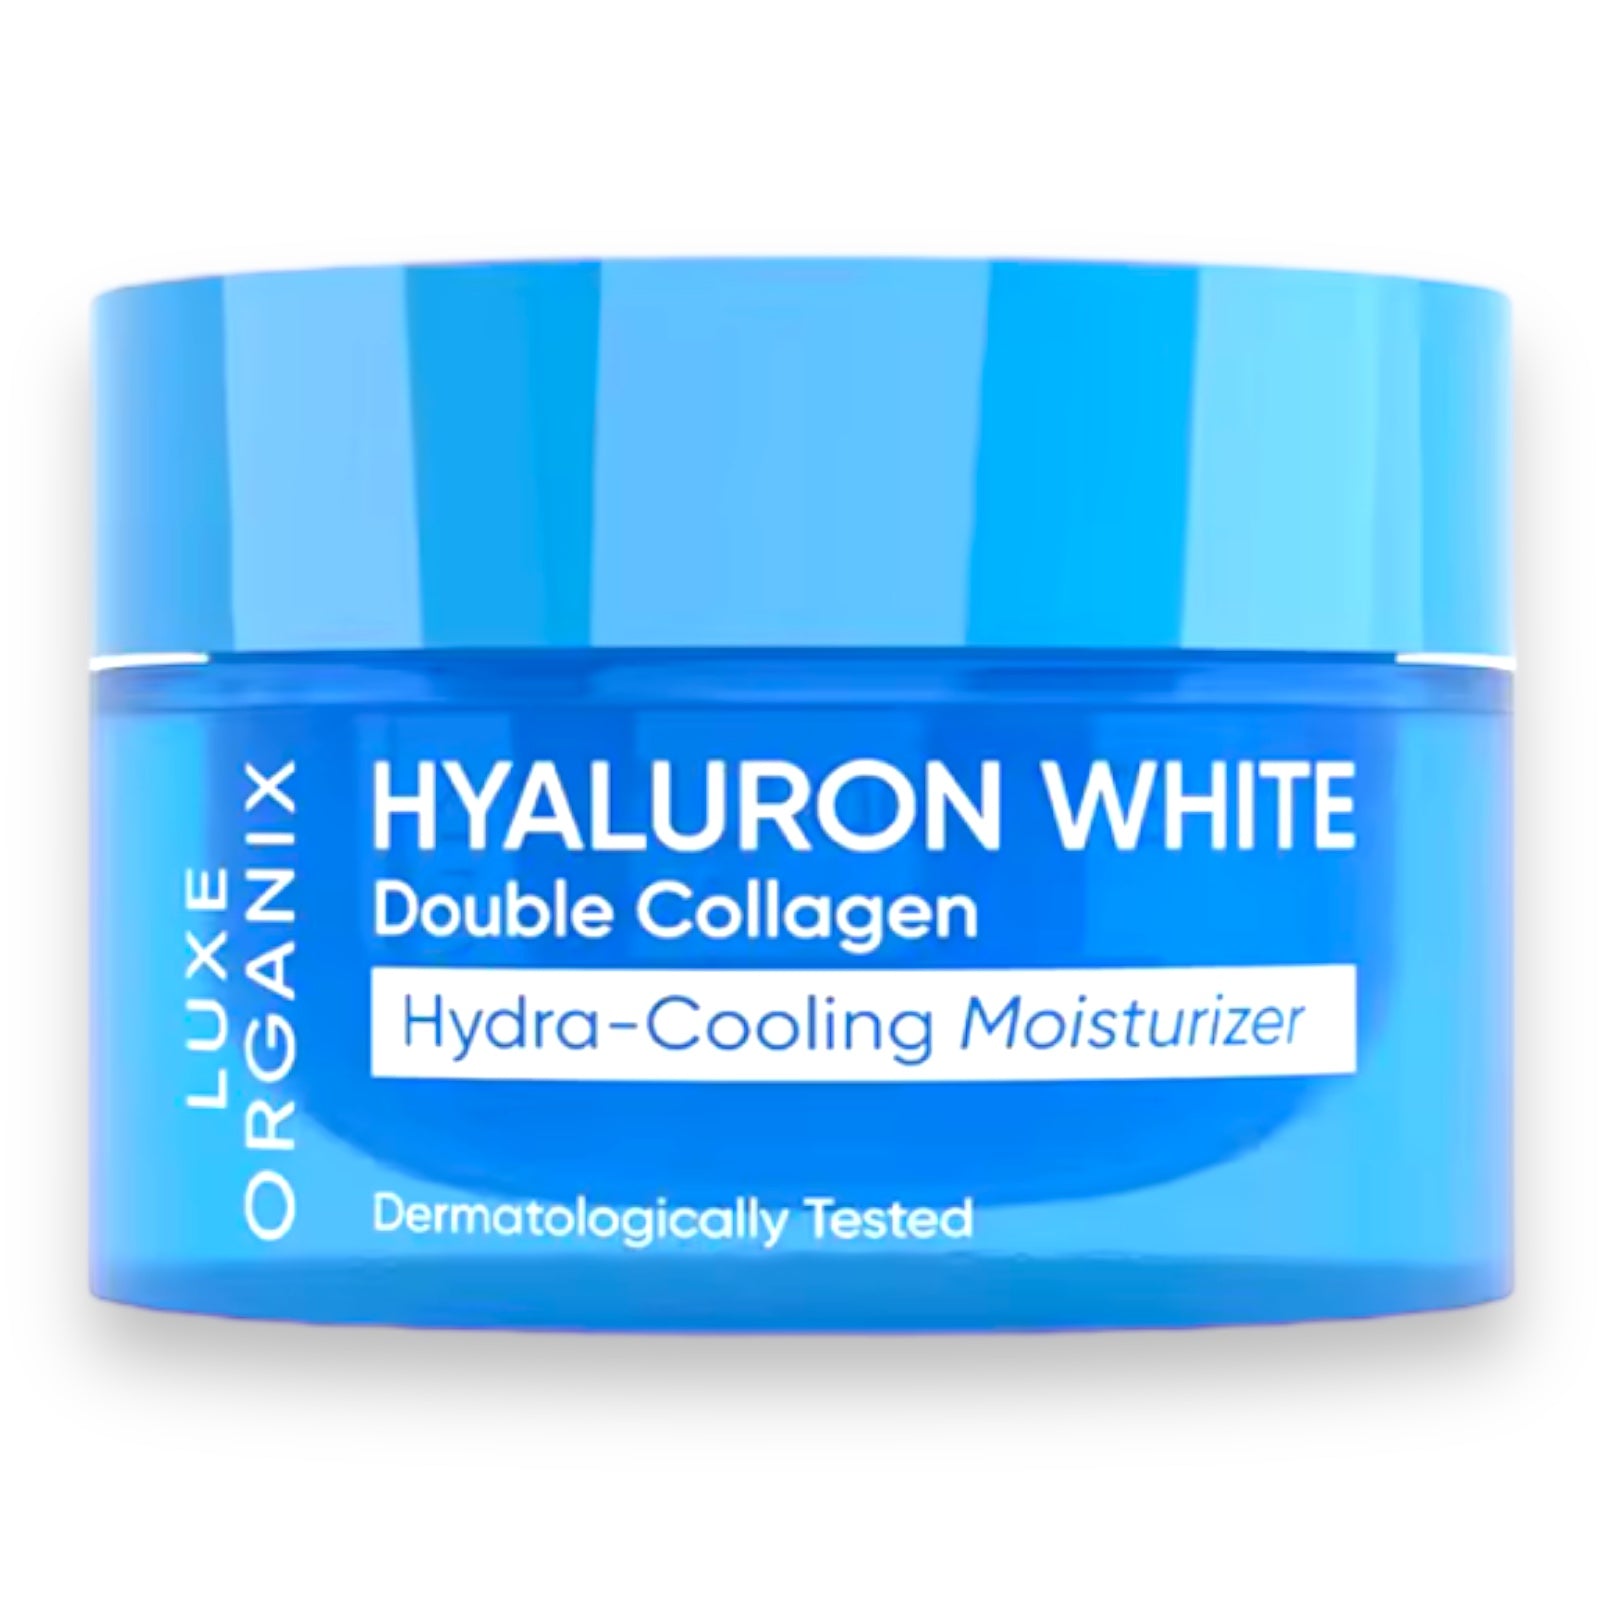 Luxe Organix - Hyaluron White - Double Collagen - Hydra Cooling Moiturizer 50g